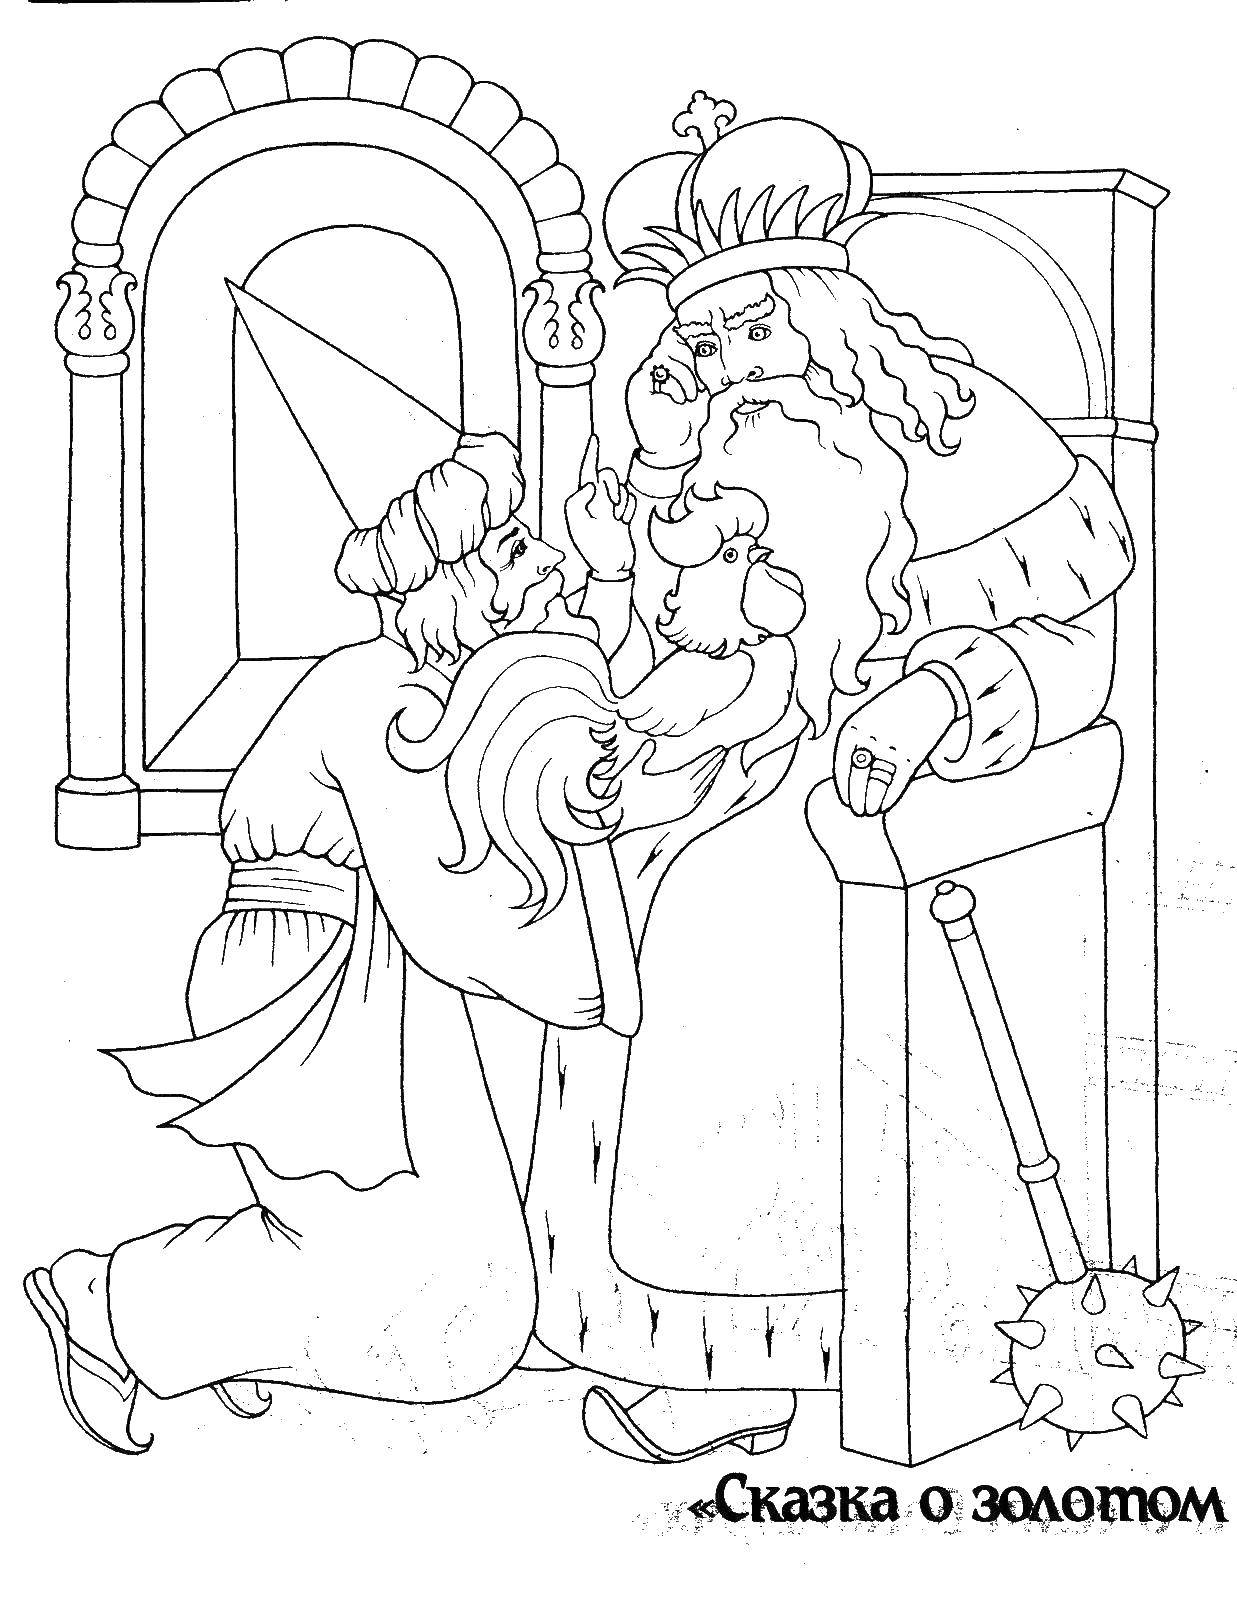 Coloring The king and the Golden Cockerel. Category Fairy tales. Tags:  the Golden Cockerel, king.